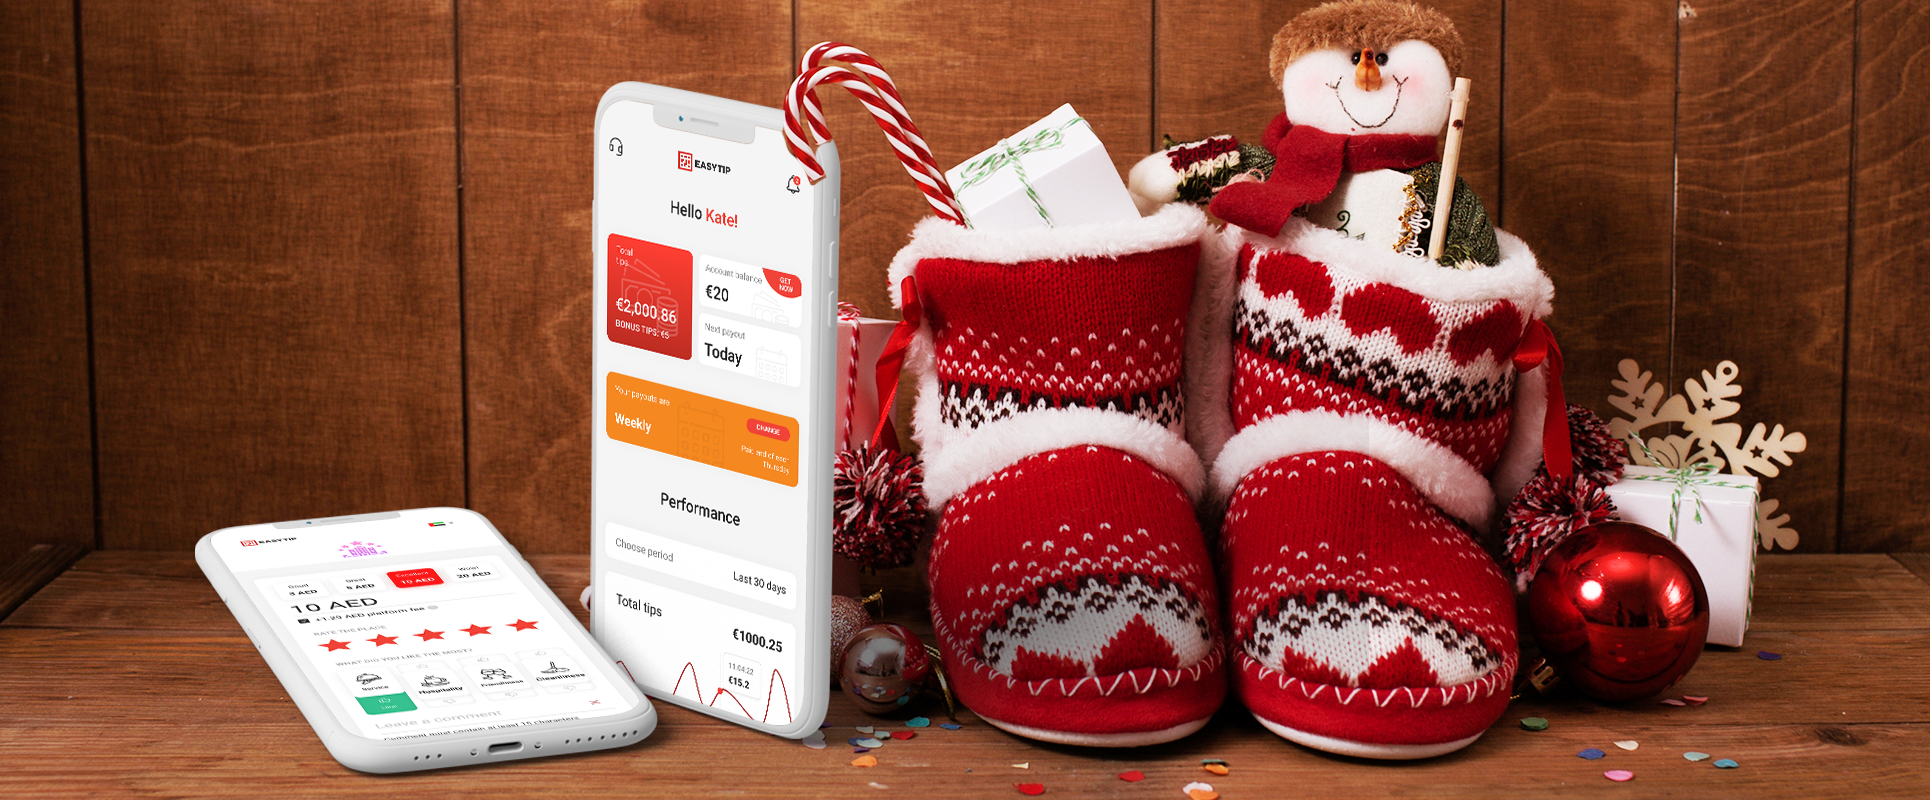 Easytips Cashless tipping app shown next to red slippers with presents in them 